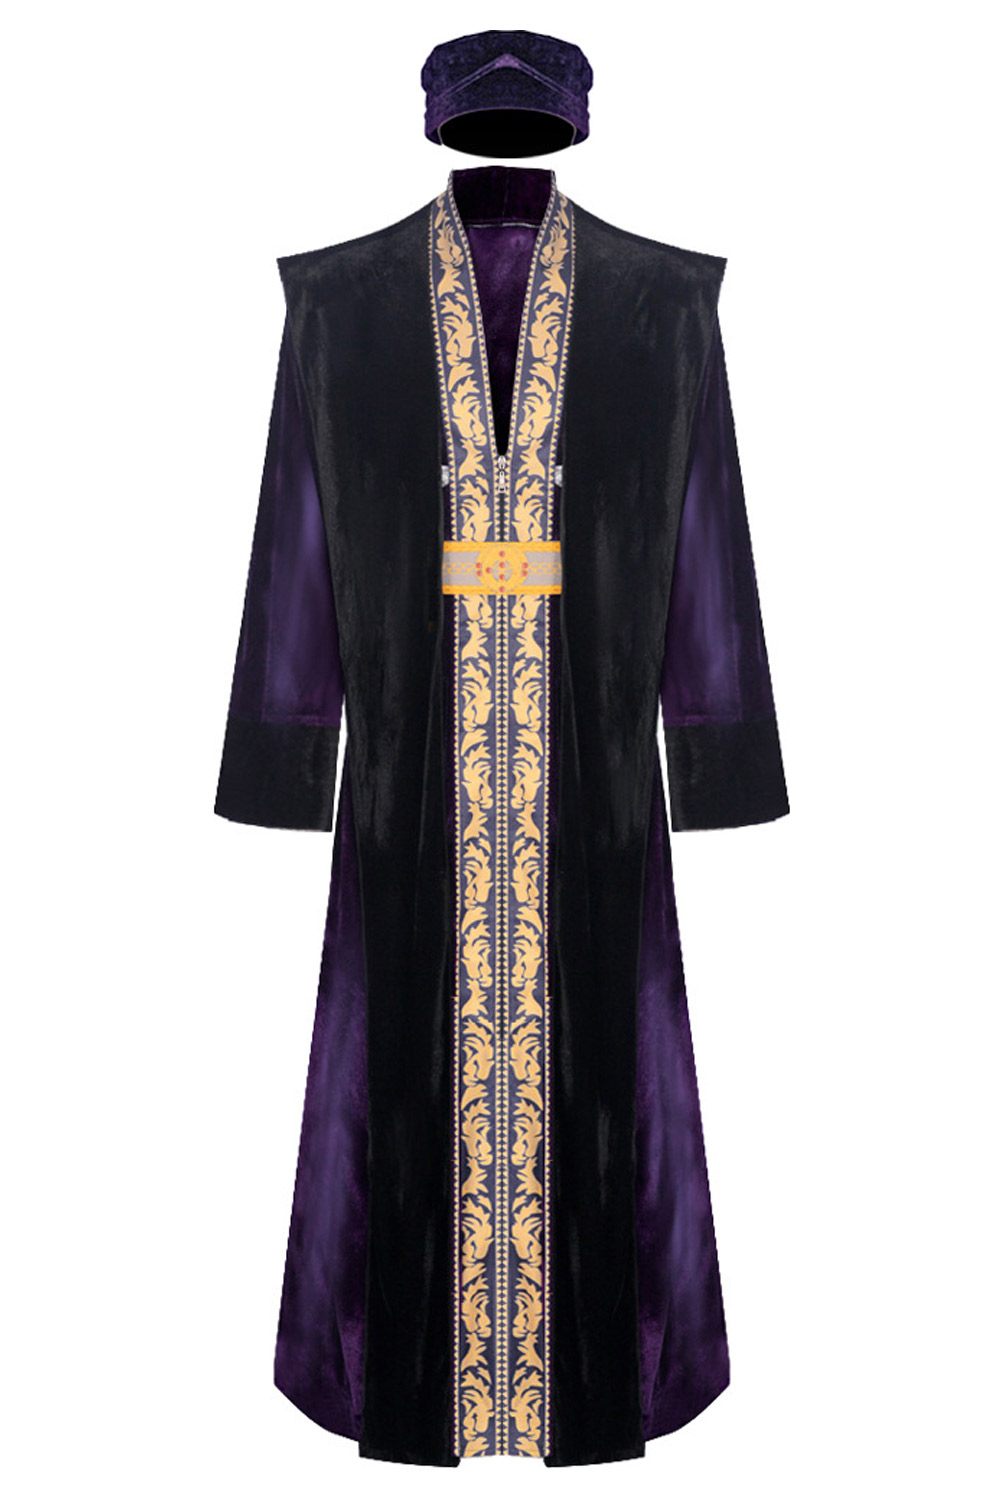 Movie Harry Potter Albus Dumbledore Purple Wizard Robe Outfits Halloween Carnival Suit Cosplay Costume 